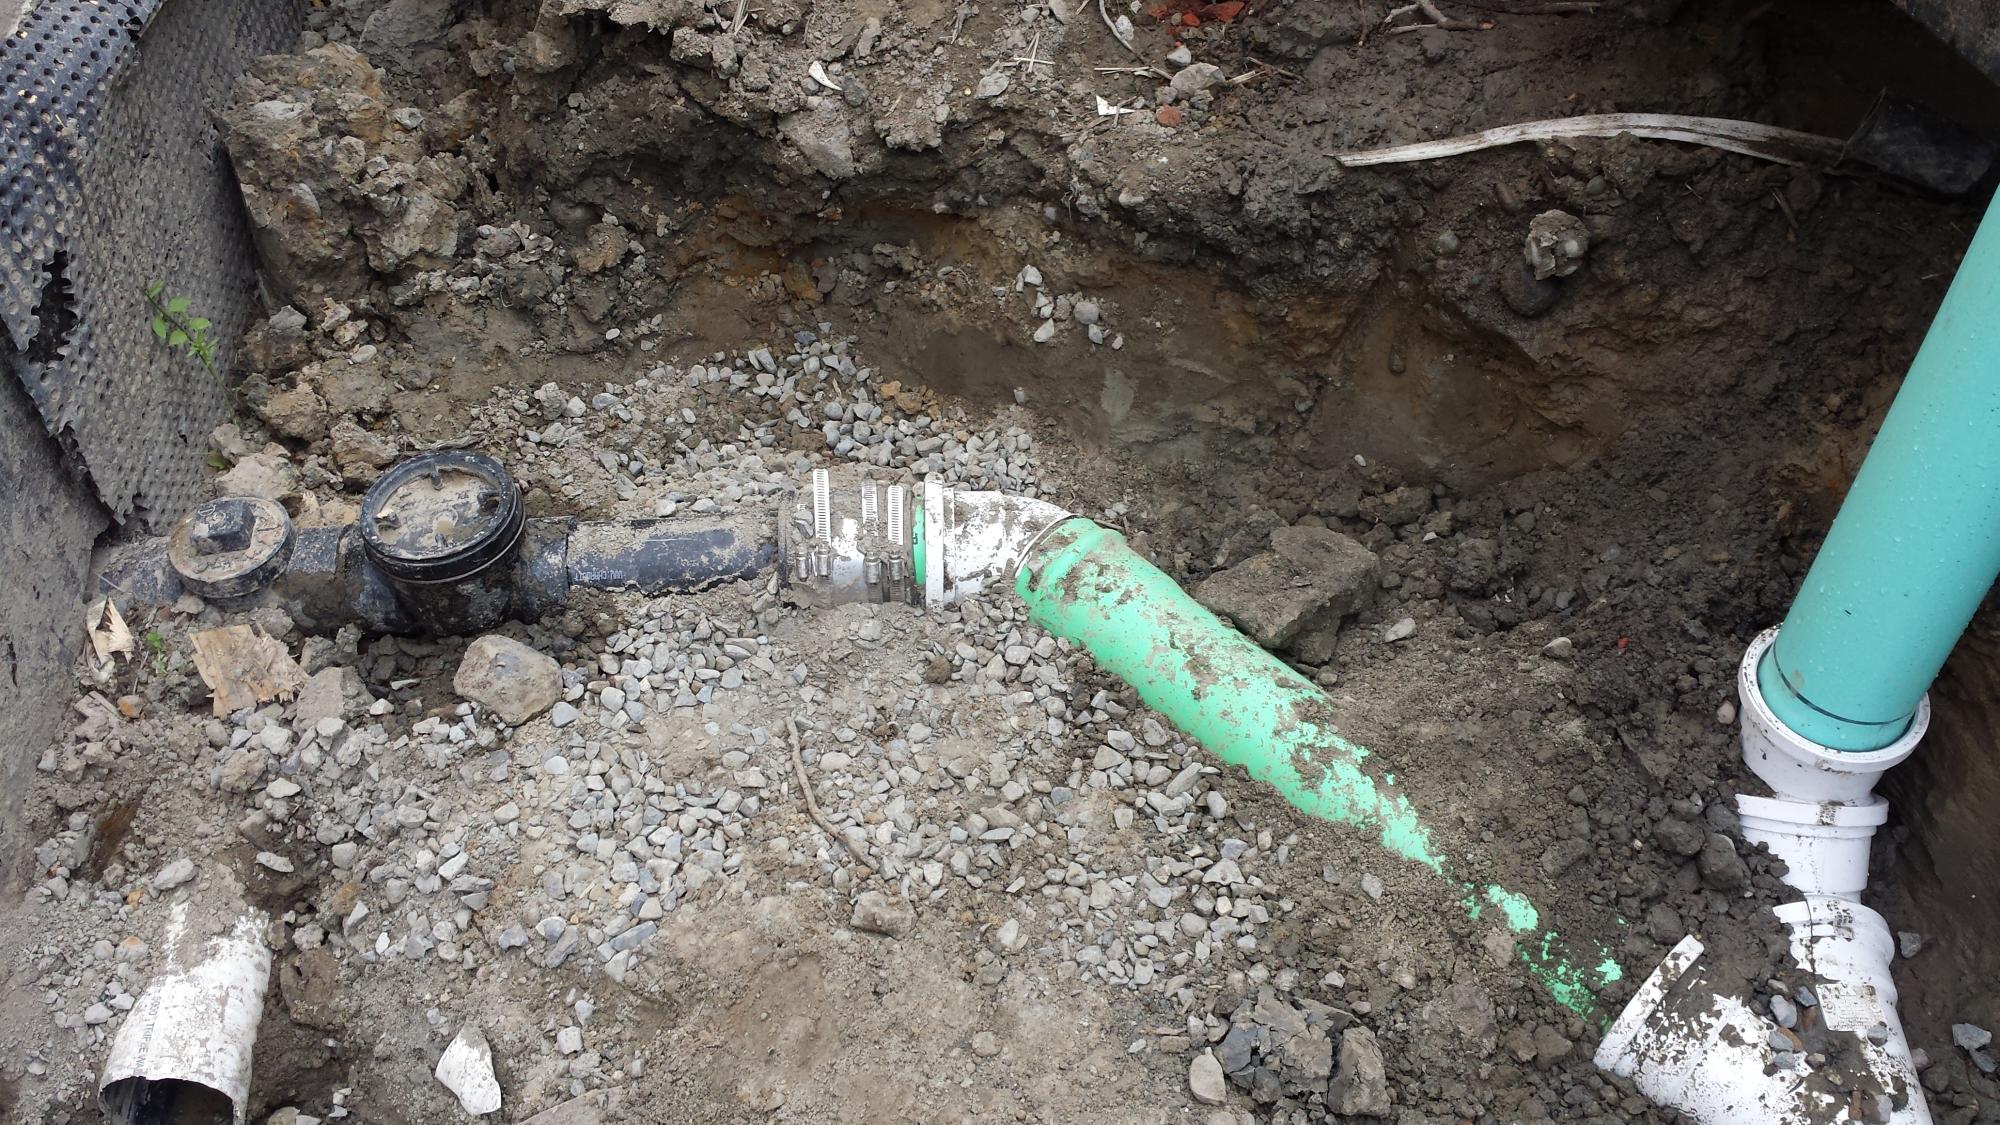 Water, Sewer &amp; Drain Issues, Installation or Repairs in Shoreline, WA